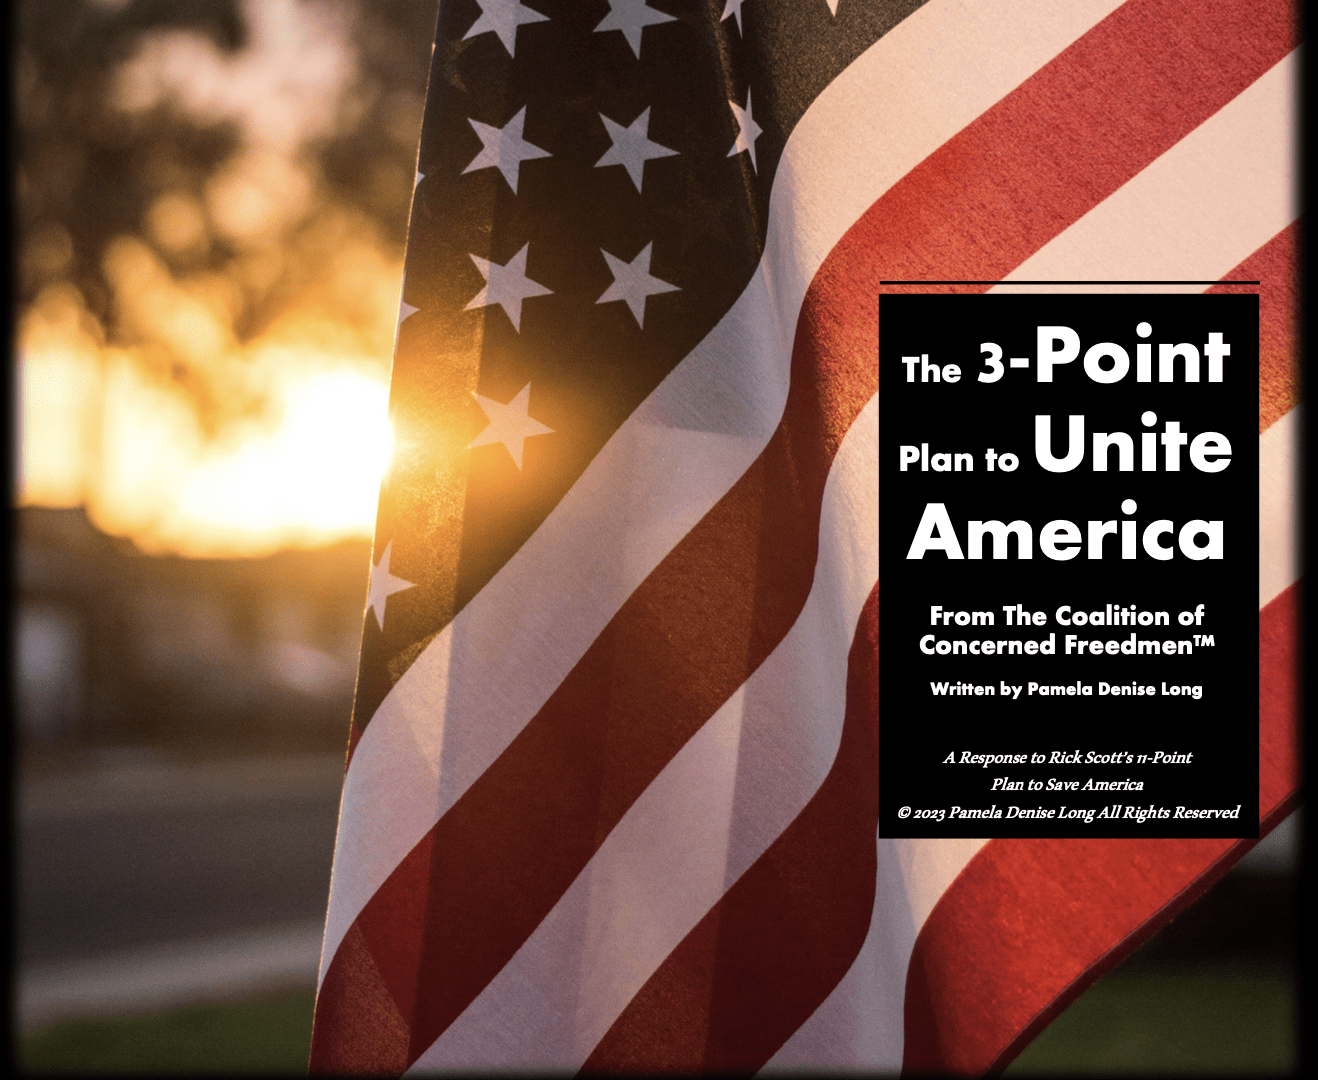 The 3-Point Plan to Unite America is a call for elected officials to act with speed, precision, and courage to save our country.